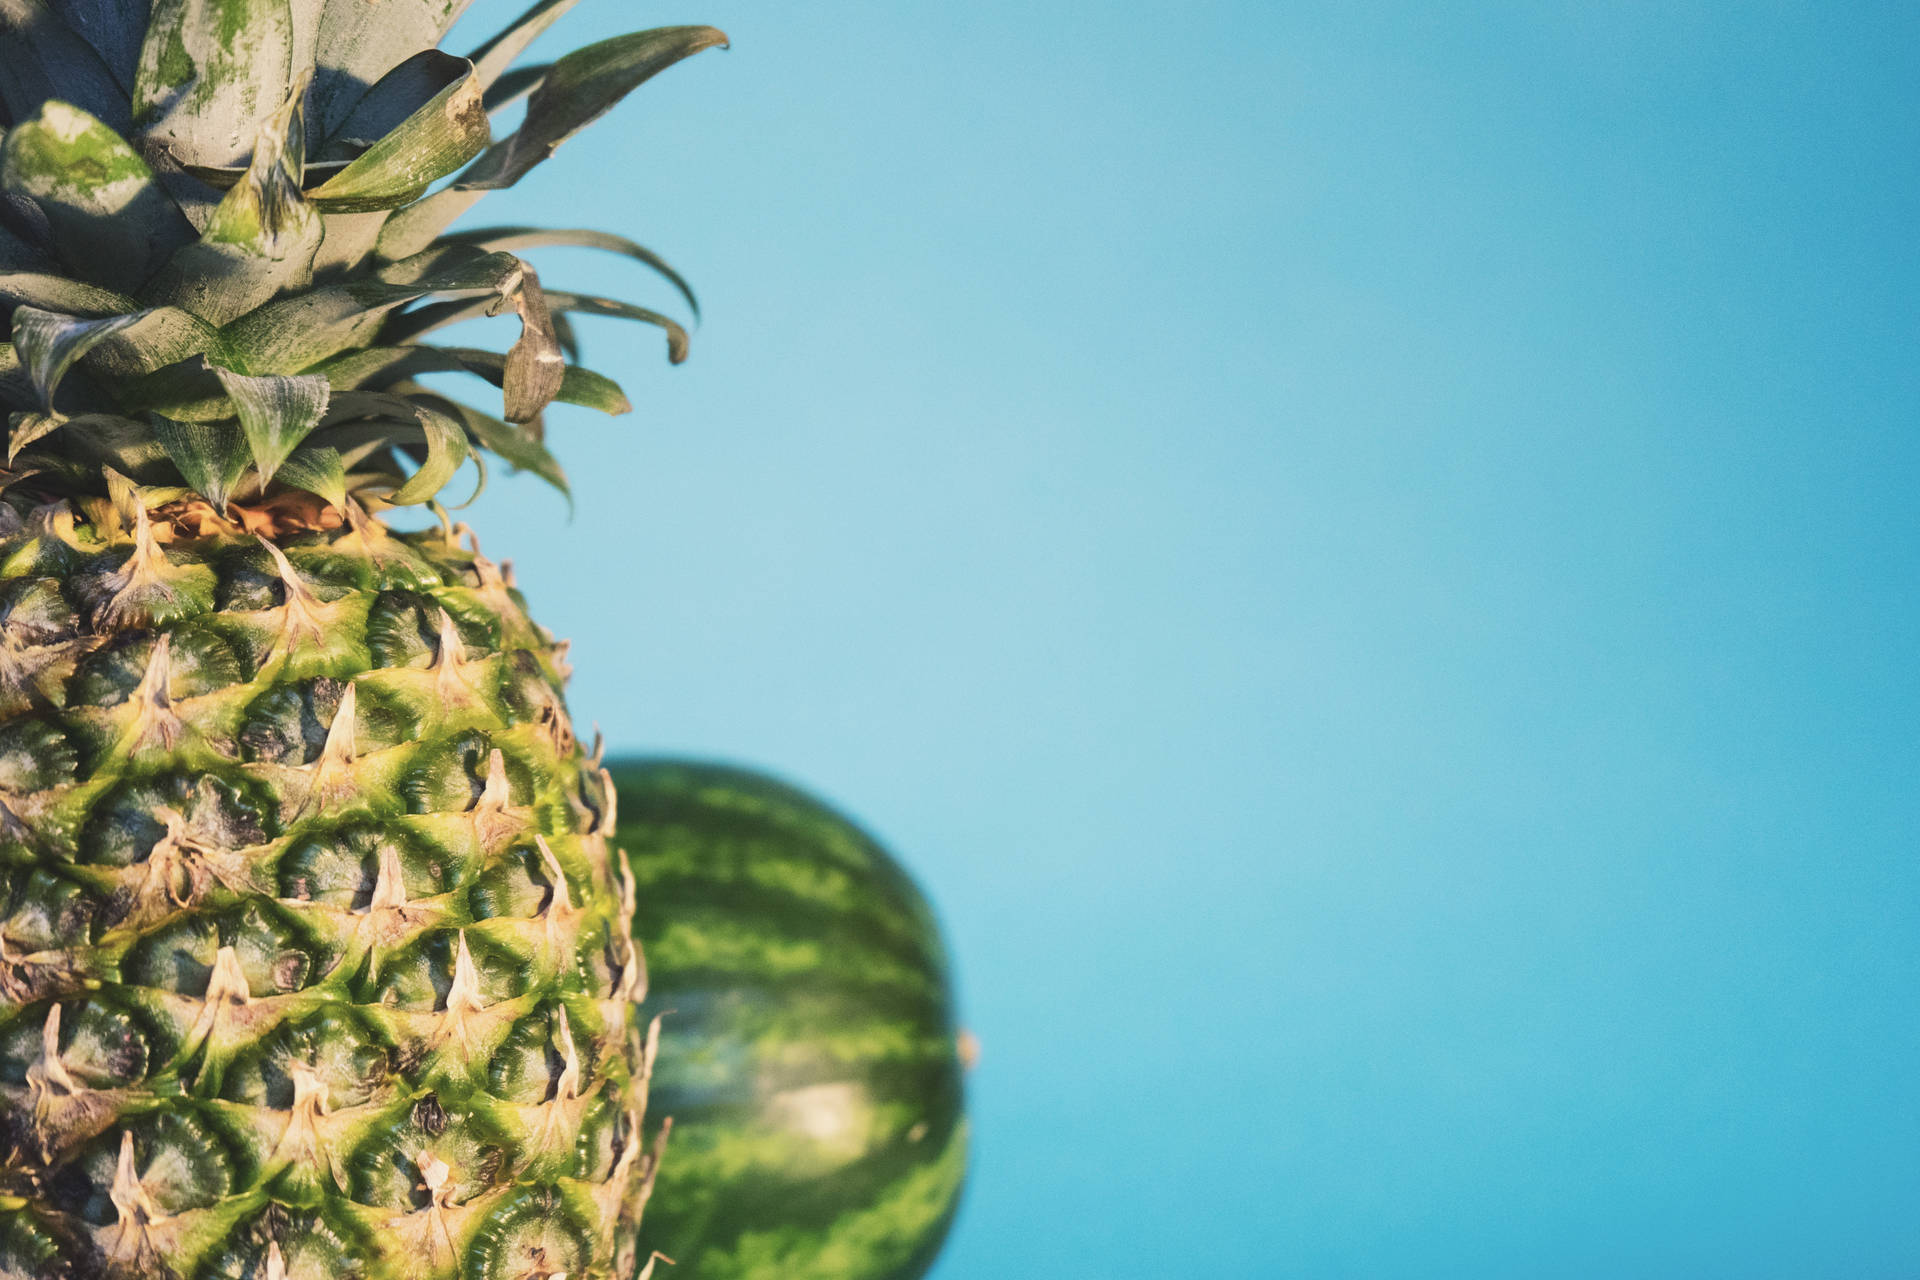 Pineapple and Watermelon Make a Delicious Summertime Treat Wallpaper